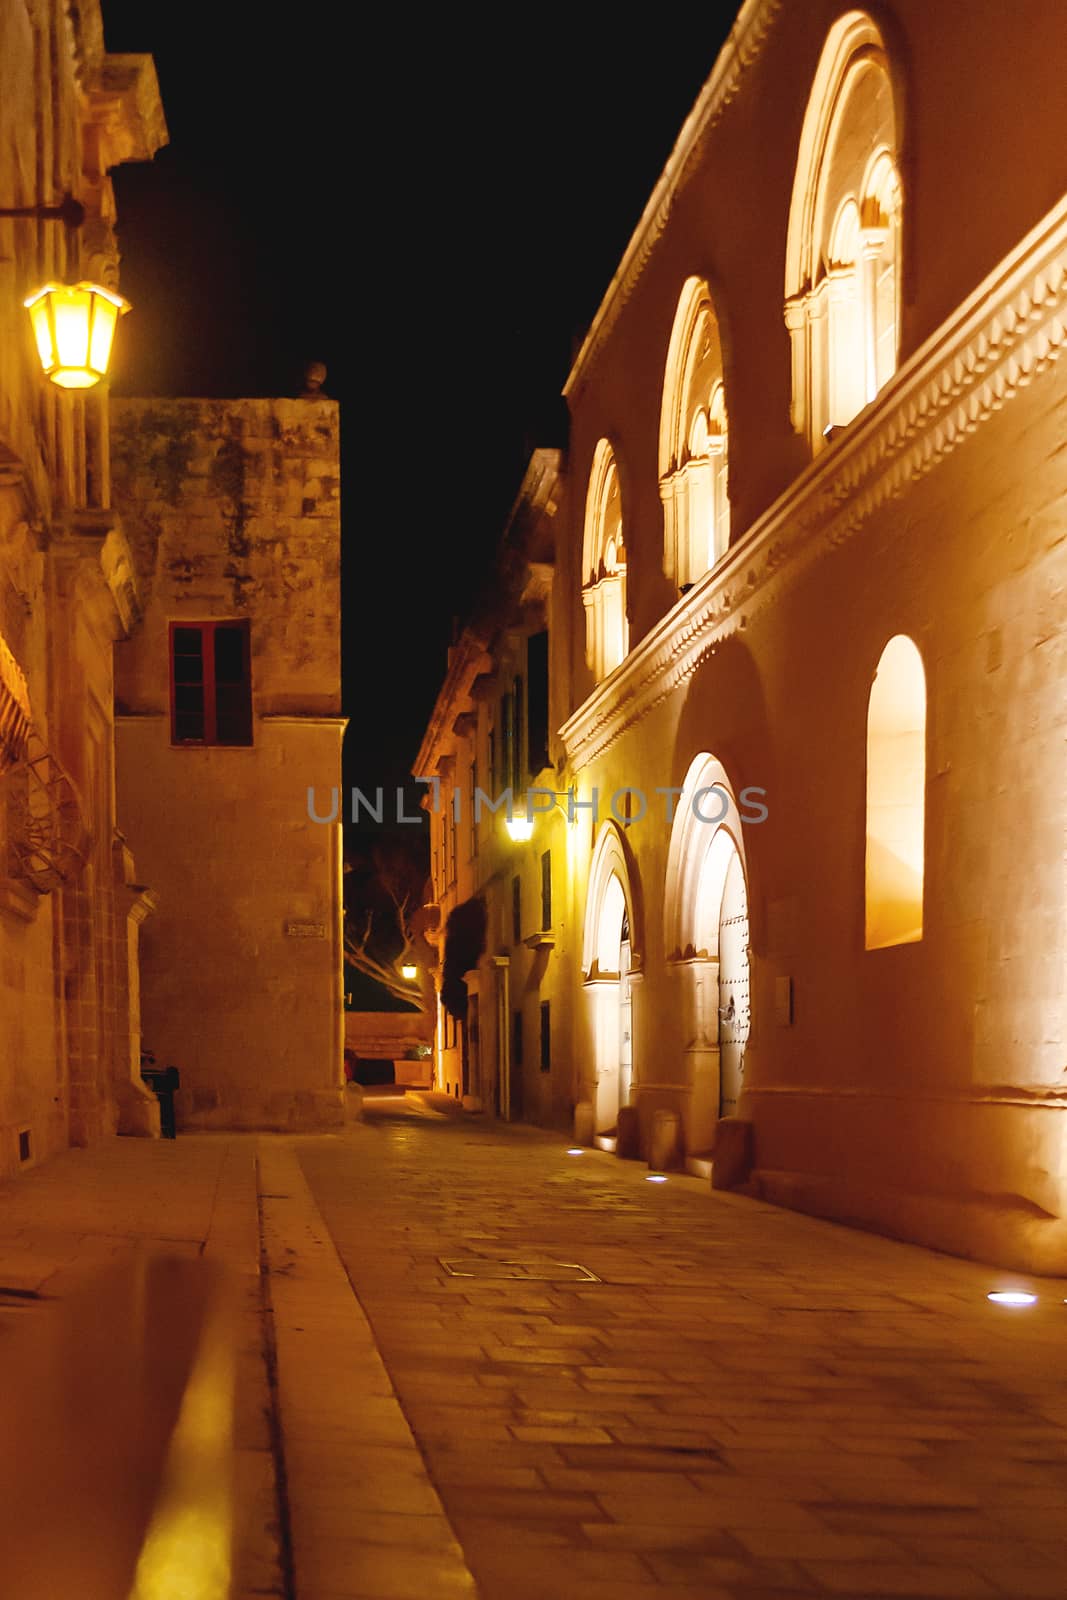 Illuminated streets of Mdina, ancient capital of Malta. Night view on buildings and wall decorations of ancient town. by aksenovko